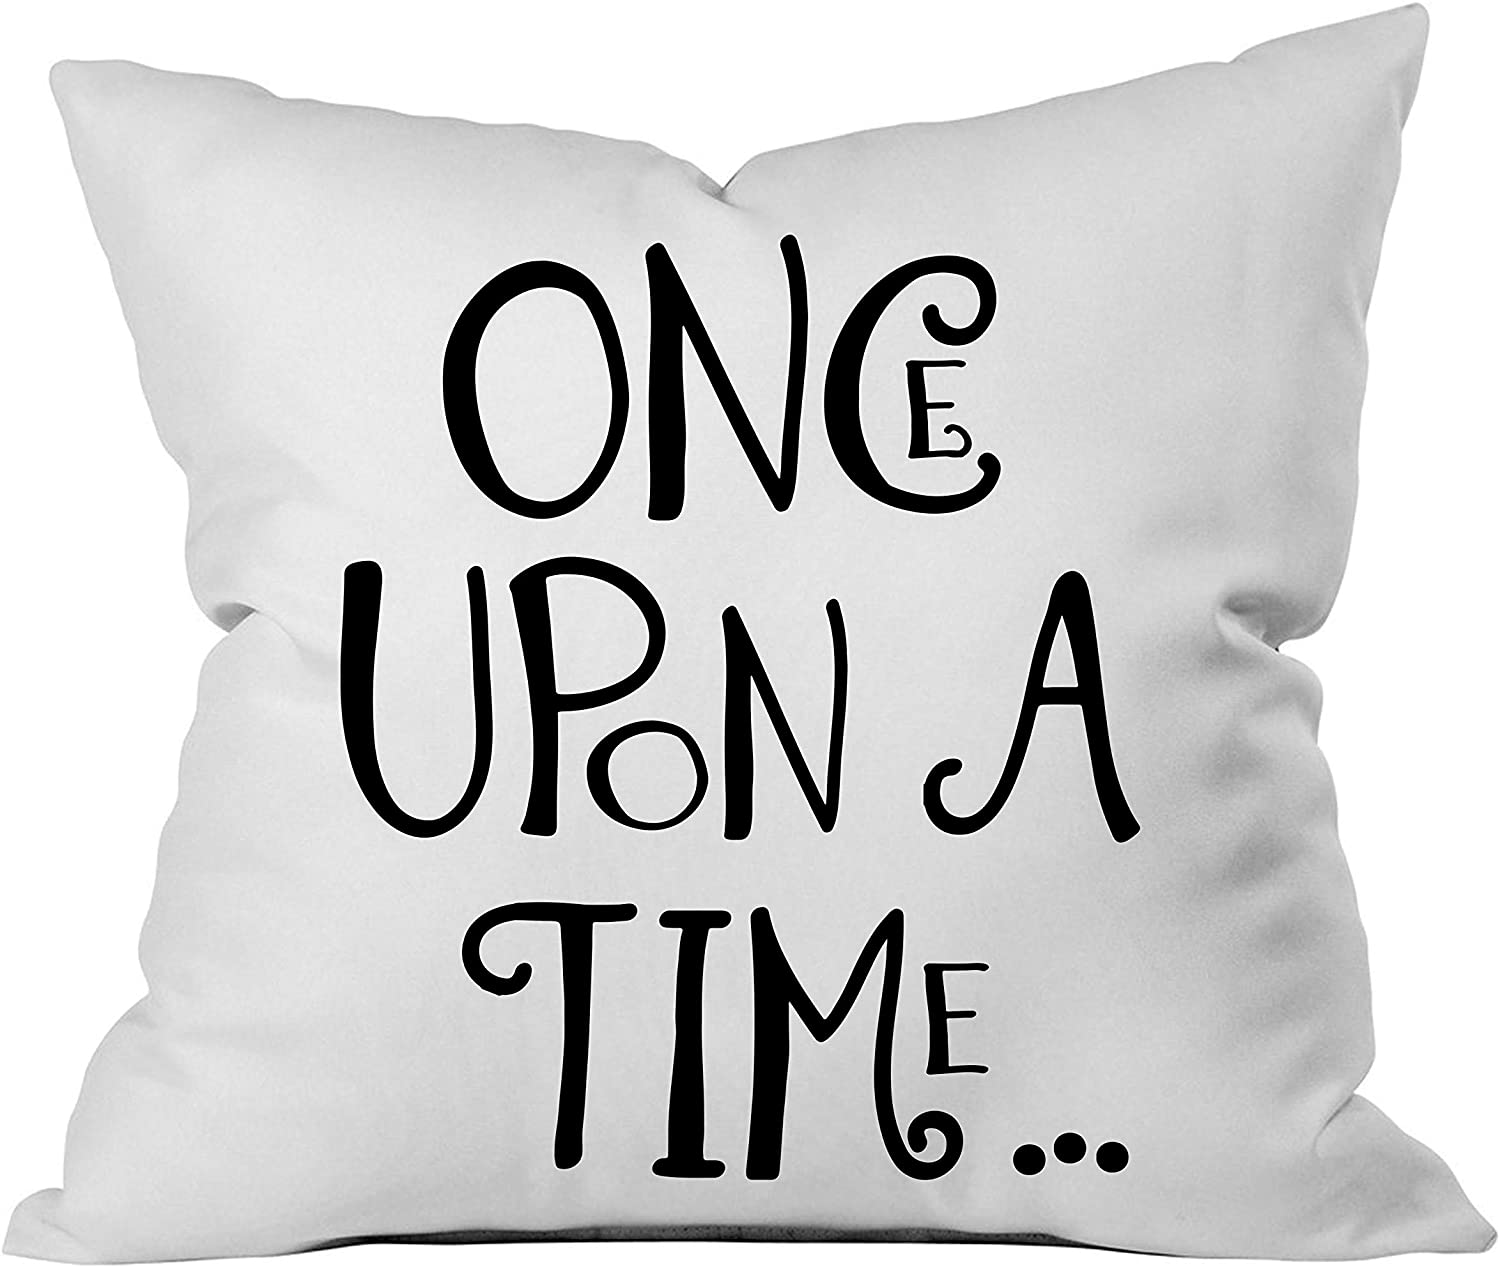 "Once  Upon A Time" Throw Pillow Cover